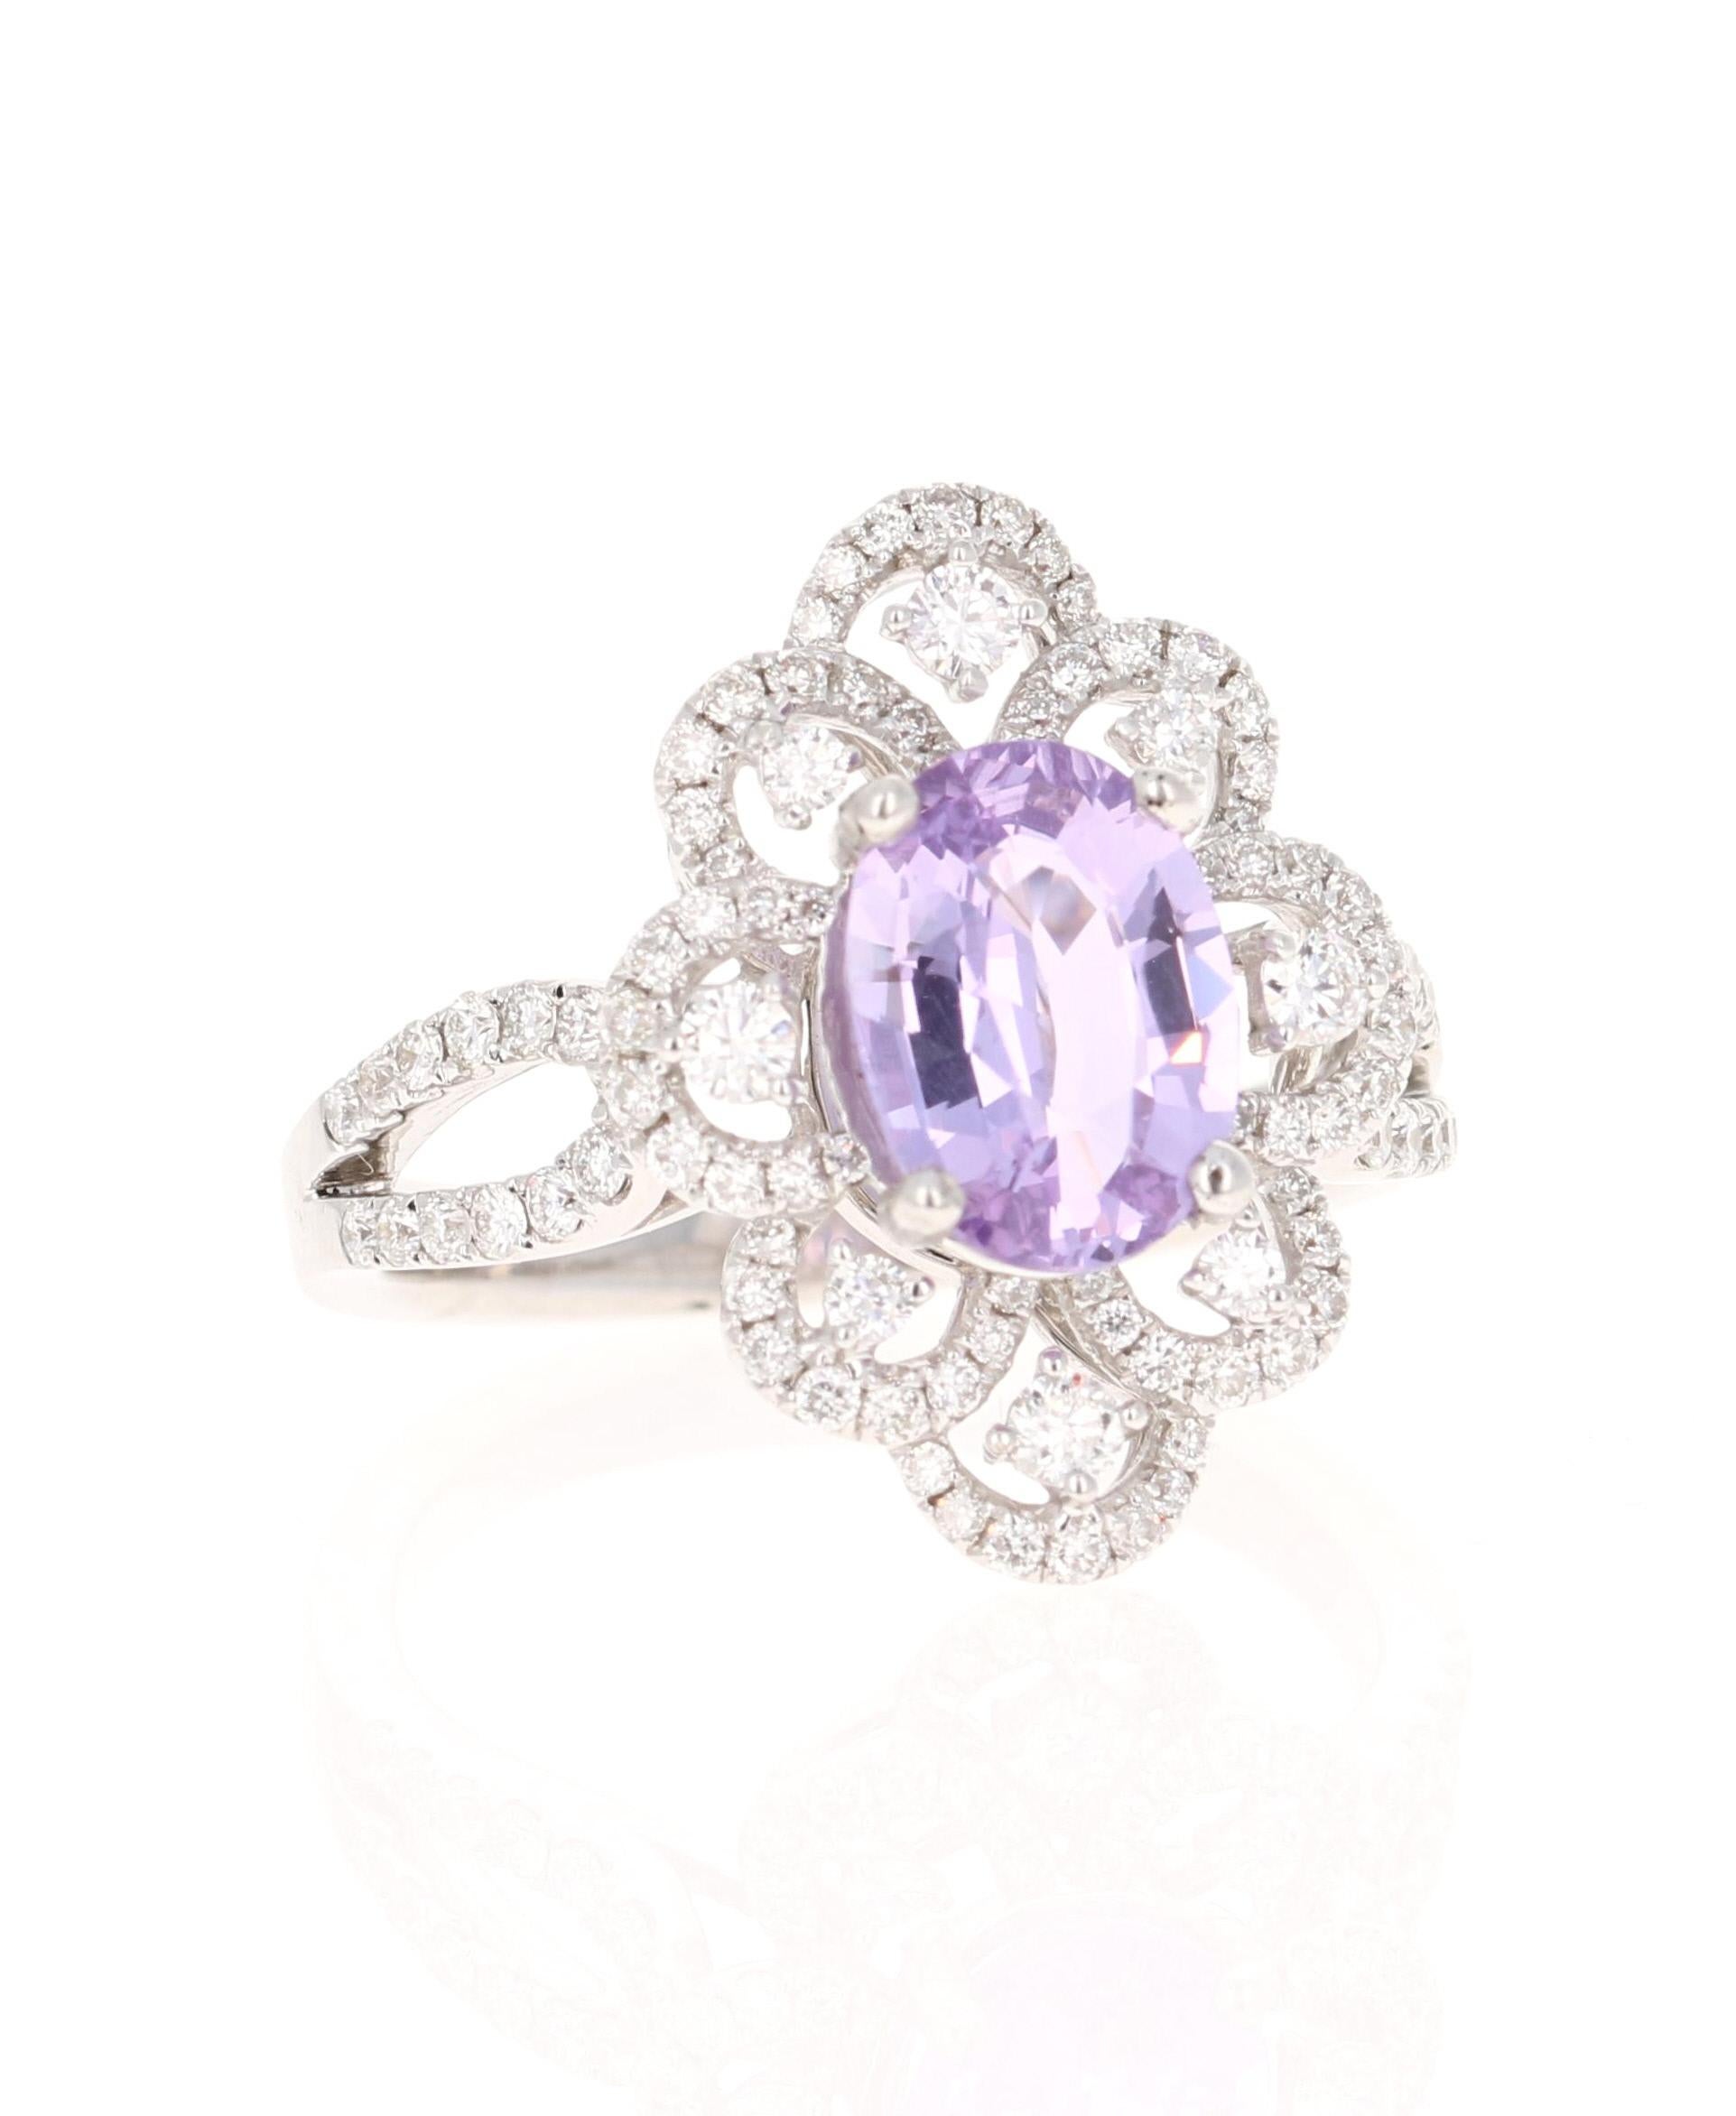 Breathtaking PPurple Sapphire Diamond Ring with a beautiful setting. Can also be a unique Engagement Ring or Cocktail Ring! 
The center Oval Cut Sapphire is 1.97 Carats. This Sapphire has No Heat and has been GIA Certified. The GIA Certificate